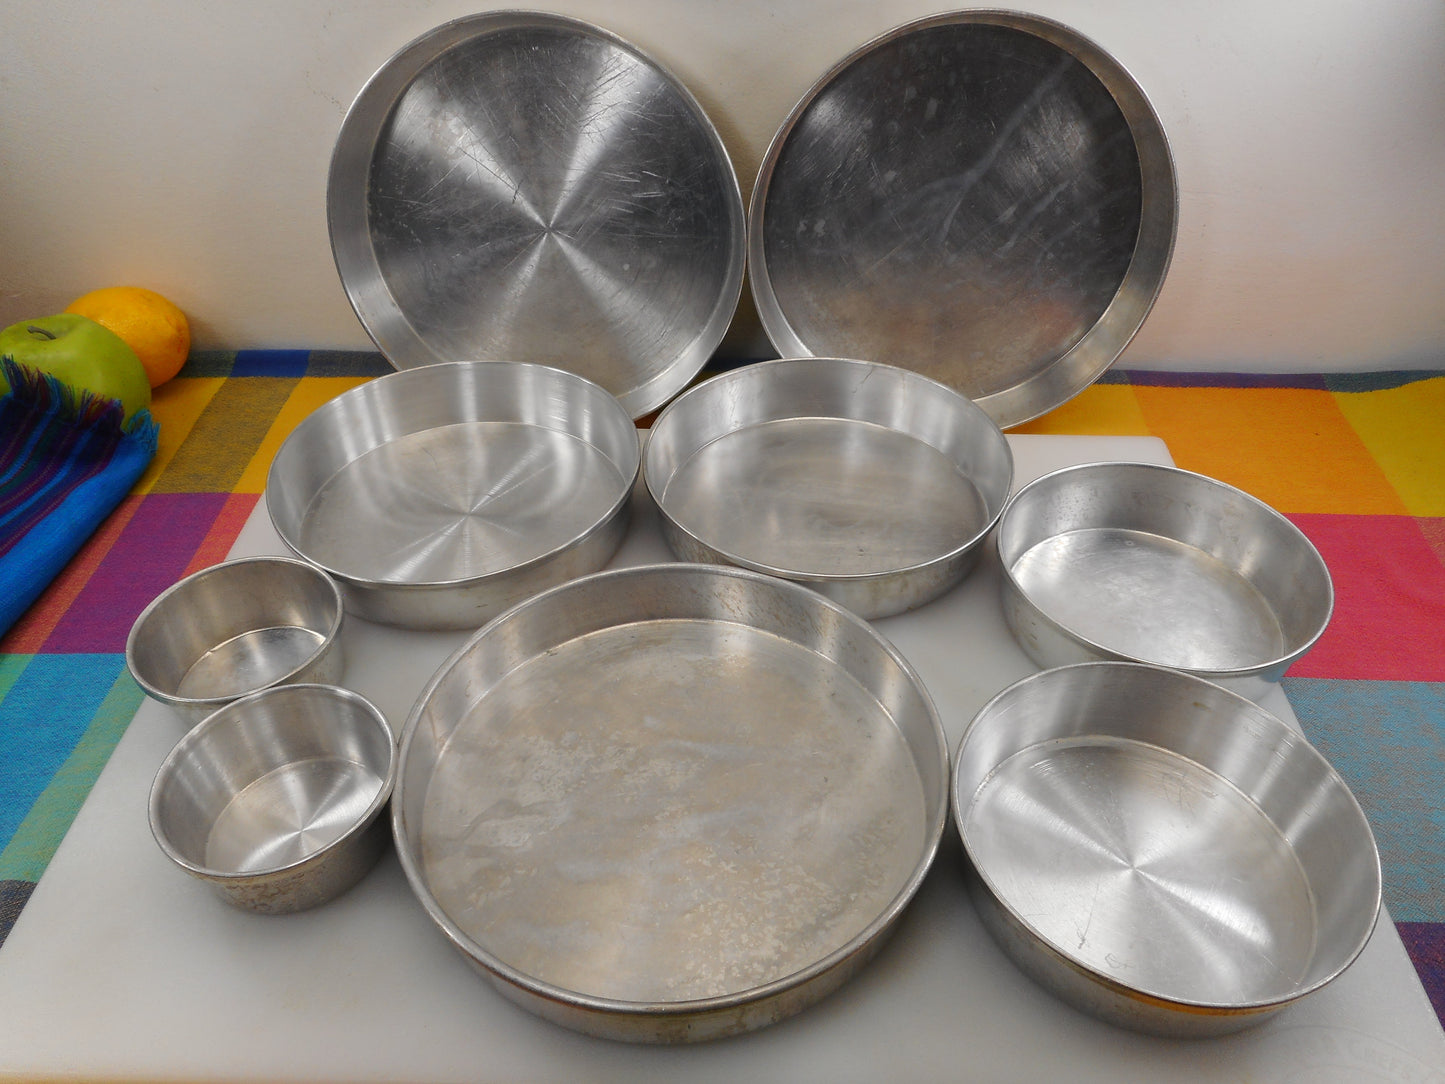 Round Aluminum Cake Pan 9 Lot - Mirro Vitality Wear Ever Unbranded 3" 5.5" 7.5" 8" 9" Vintage